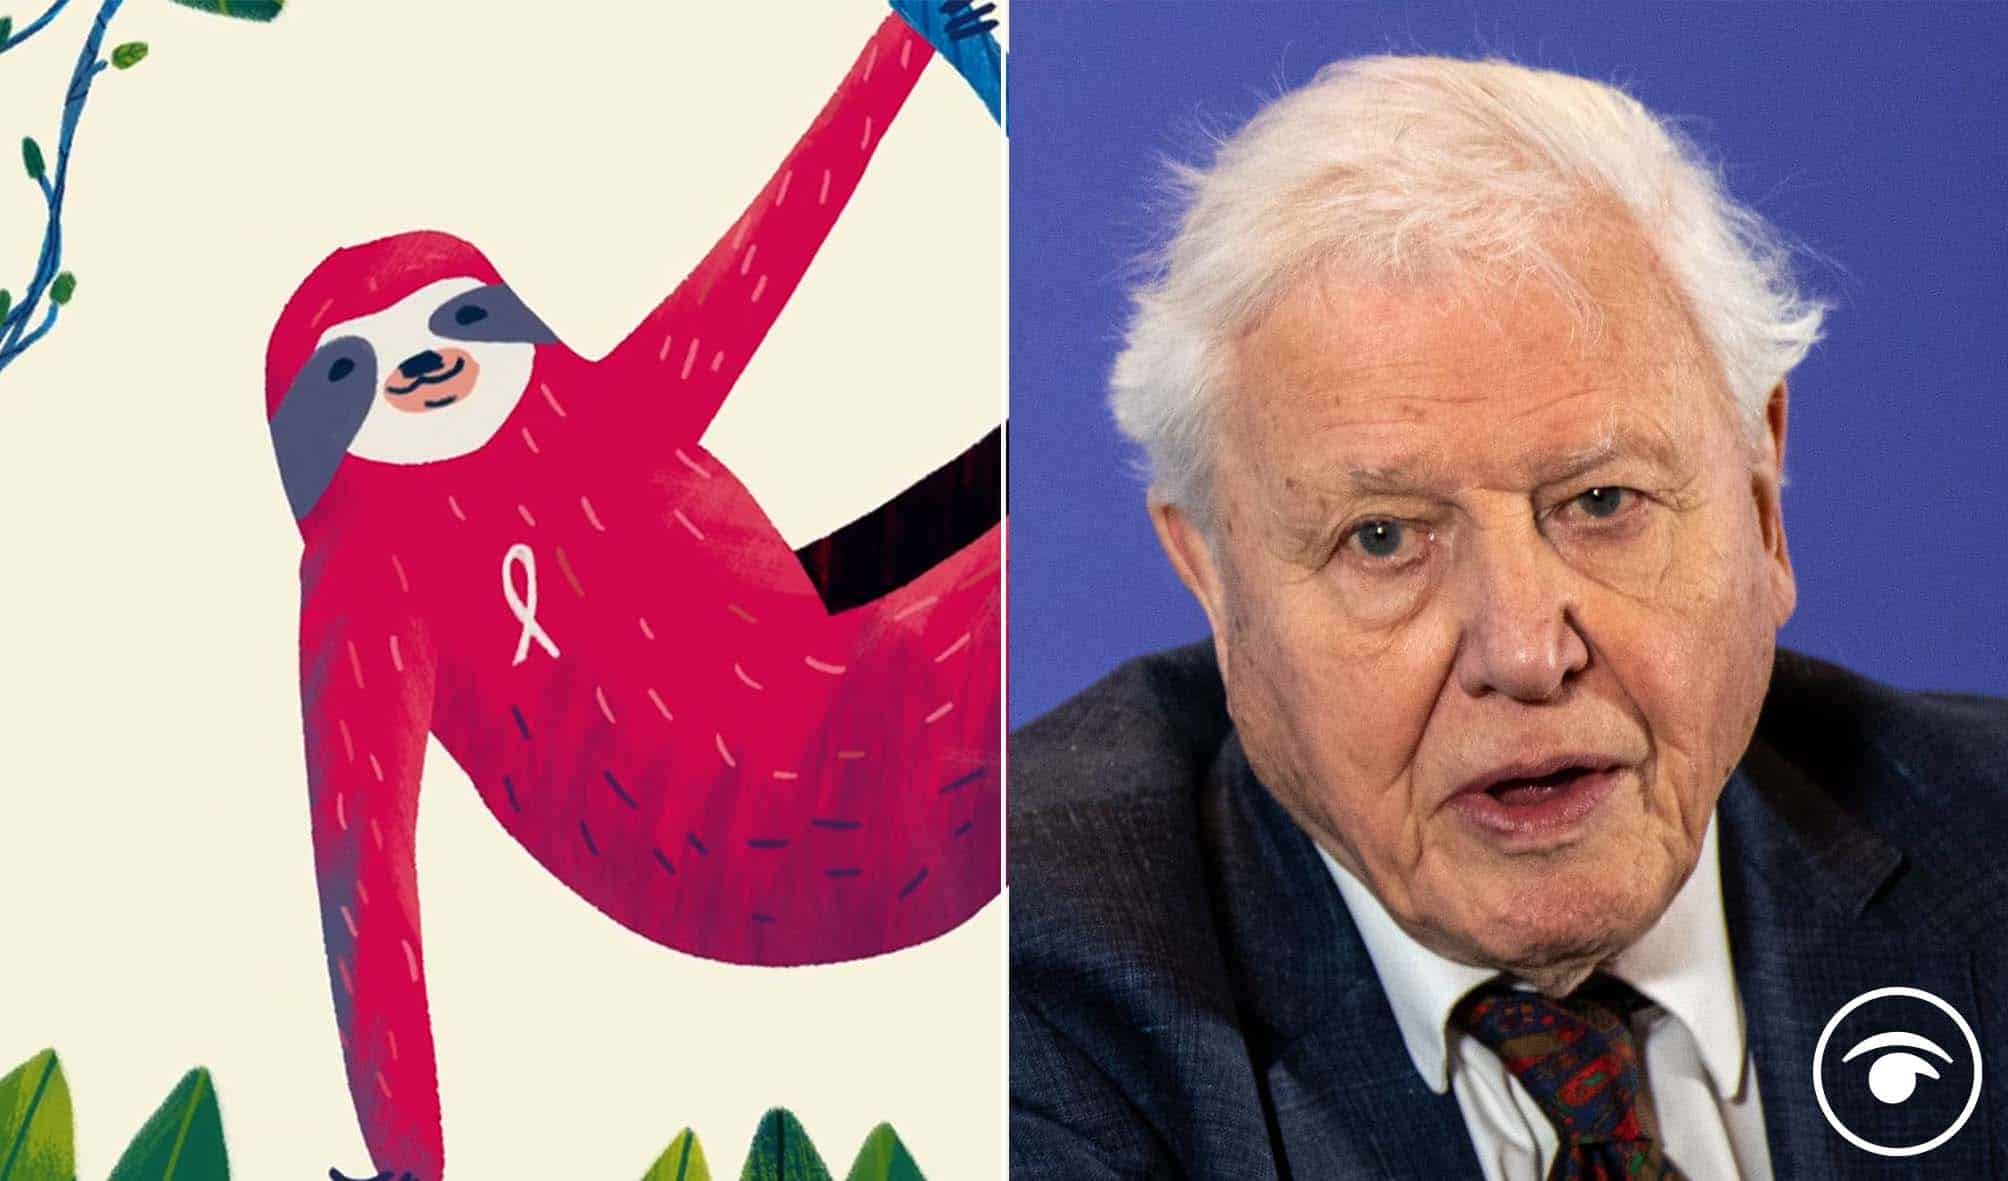 Watch: Sir David Attenborough narrates animation on protecting ‘indispensable’ nature